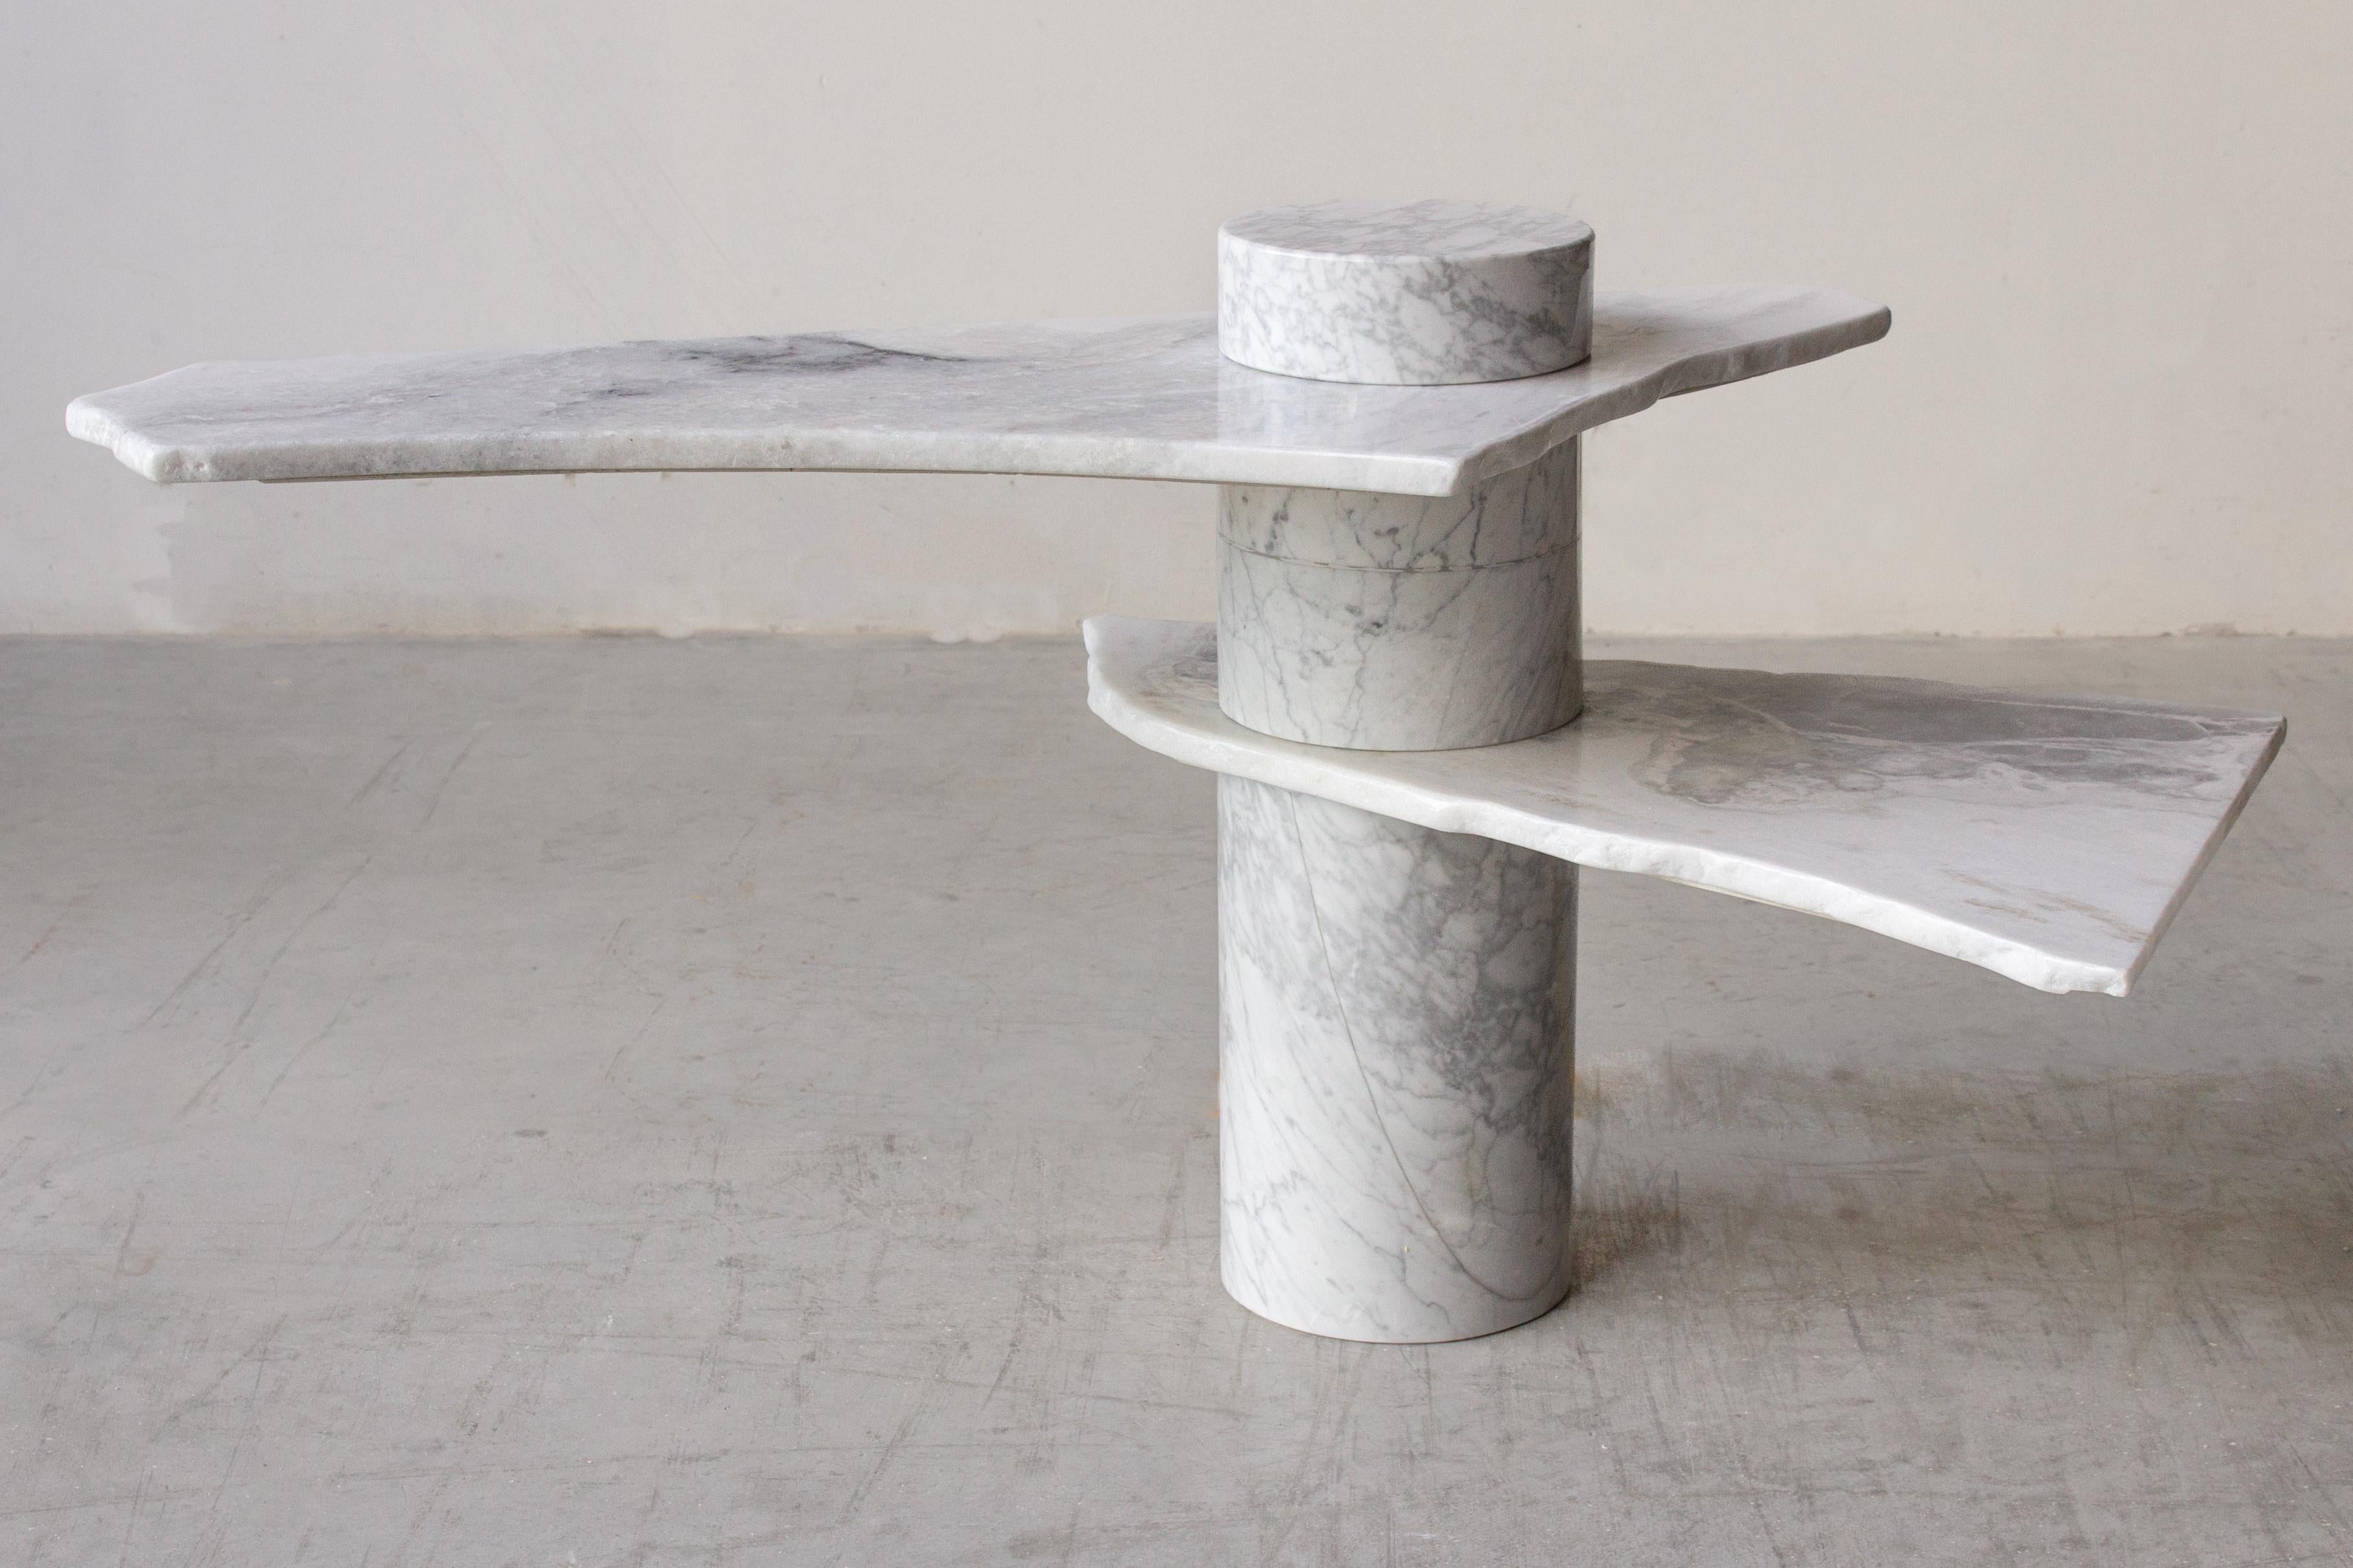 SST025 side table by Stone Stackers
Dimensions: D 70 x W 120 x H 61 cm
Materials: Calacatta Vagli marble, Dover White marble, Namibia Sky marble.
Marble Shelves: Dover White & Namibia Sky
Marble Structure: Calacatta Vagli
Weight: 73 kg

This side